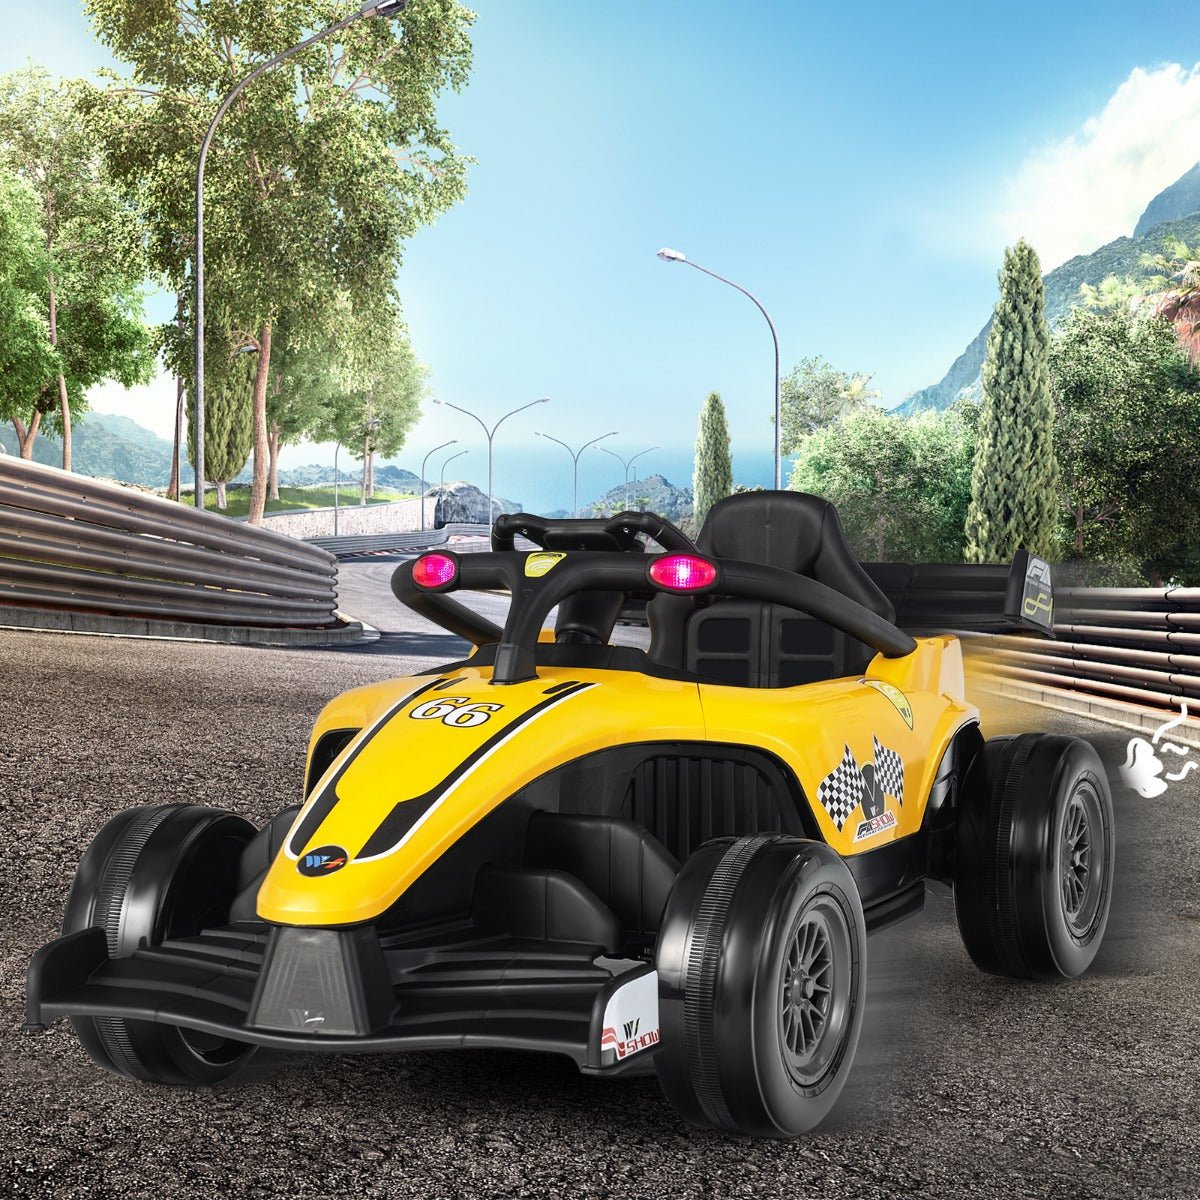 Ride on Racing Car Fun: Where Style Meets Speed!